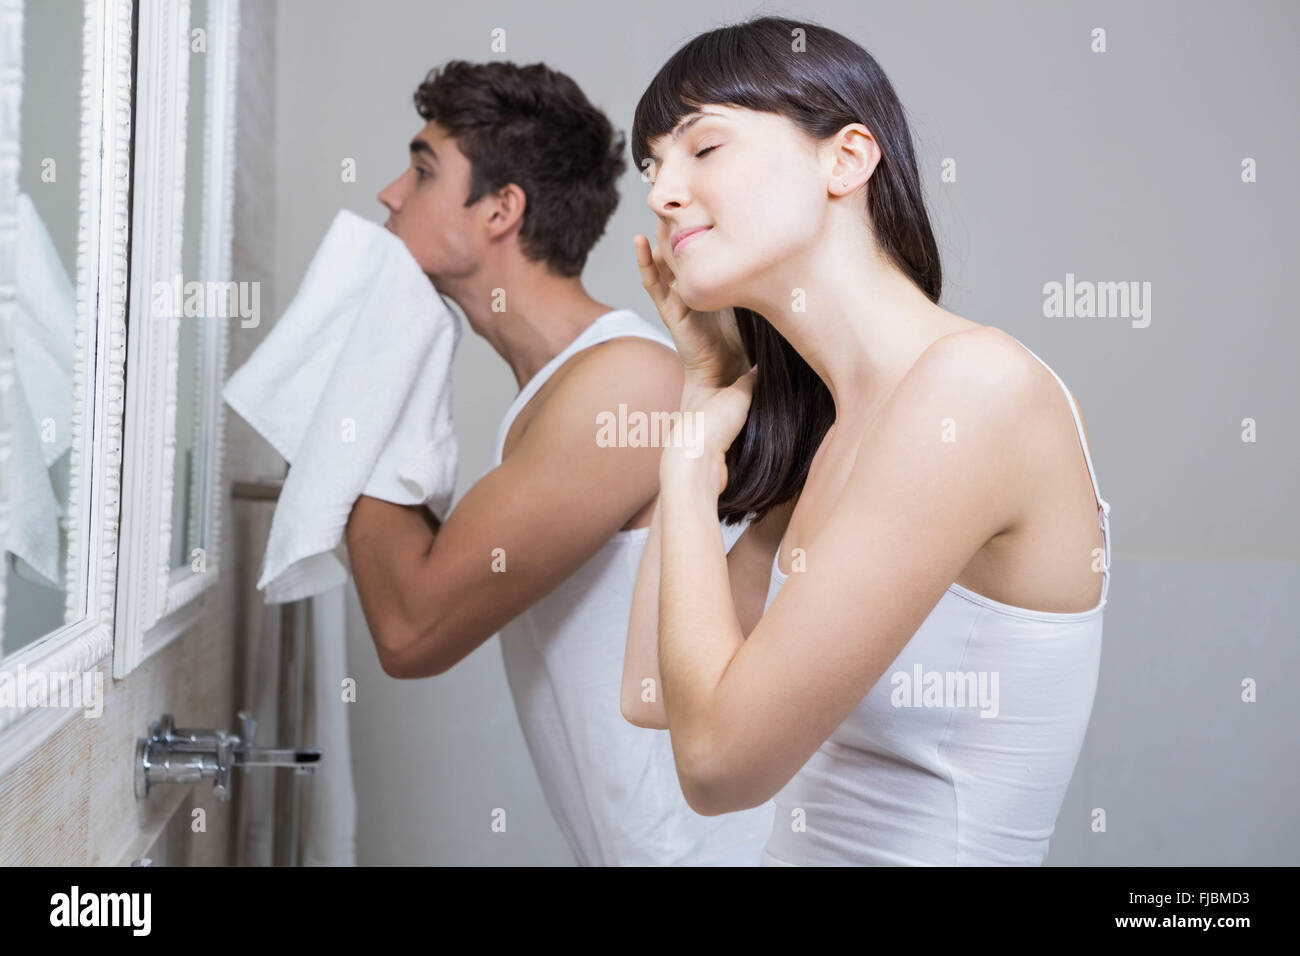 Bathroom routine for young couple Stock Photo